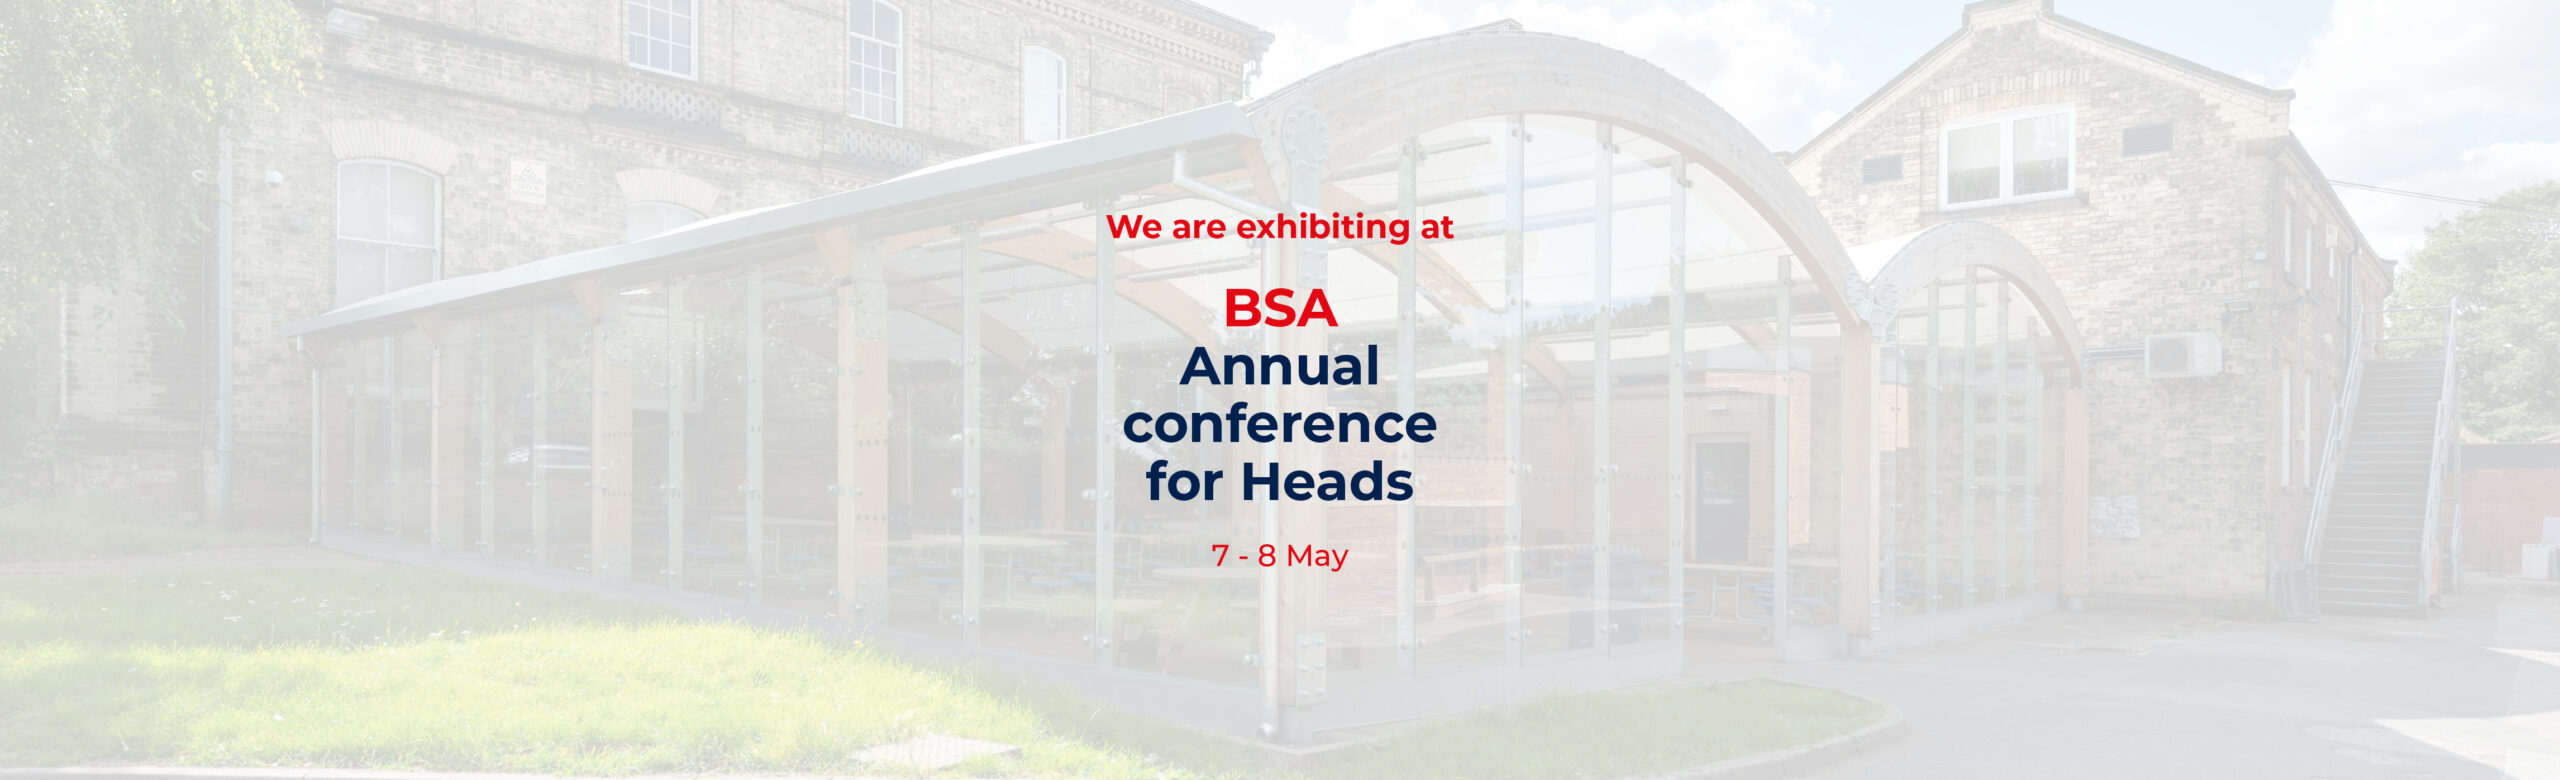 BSA Annual Conference for Heads